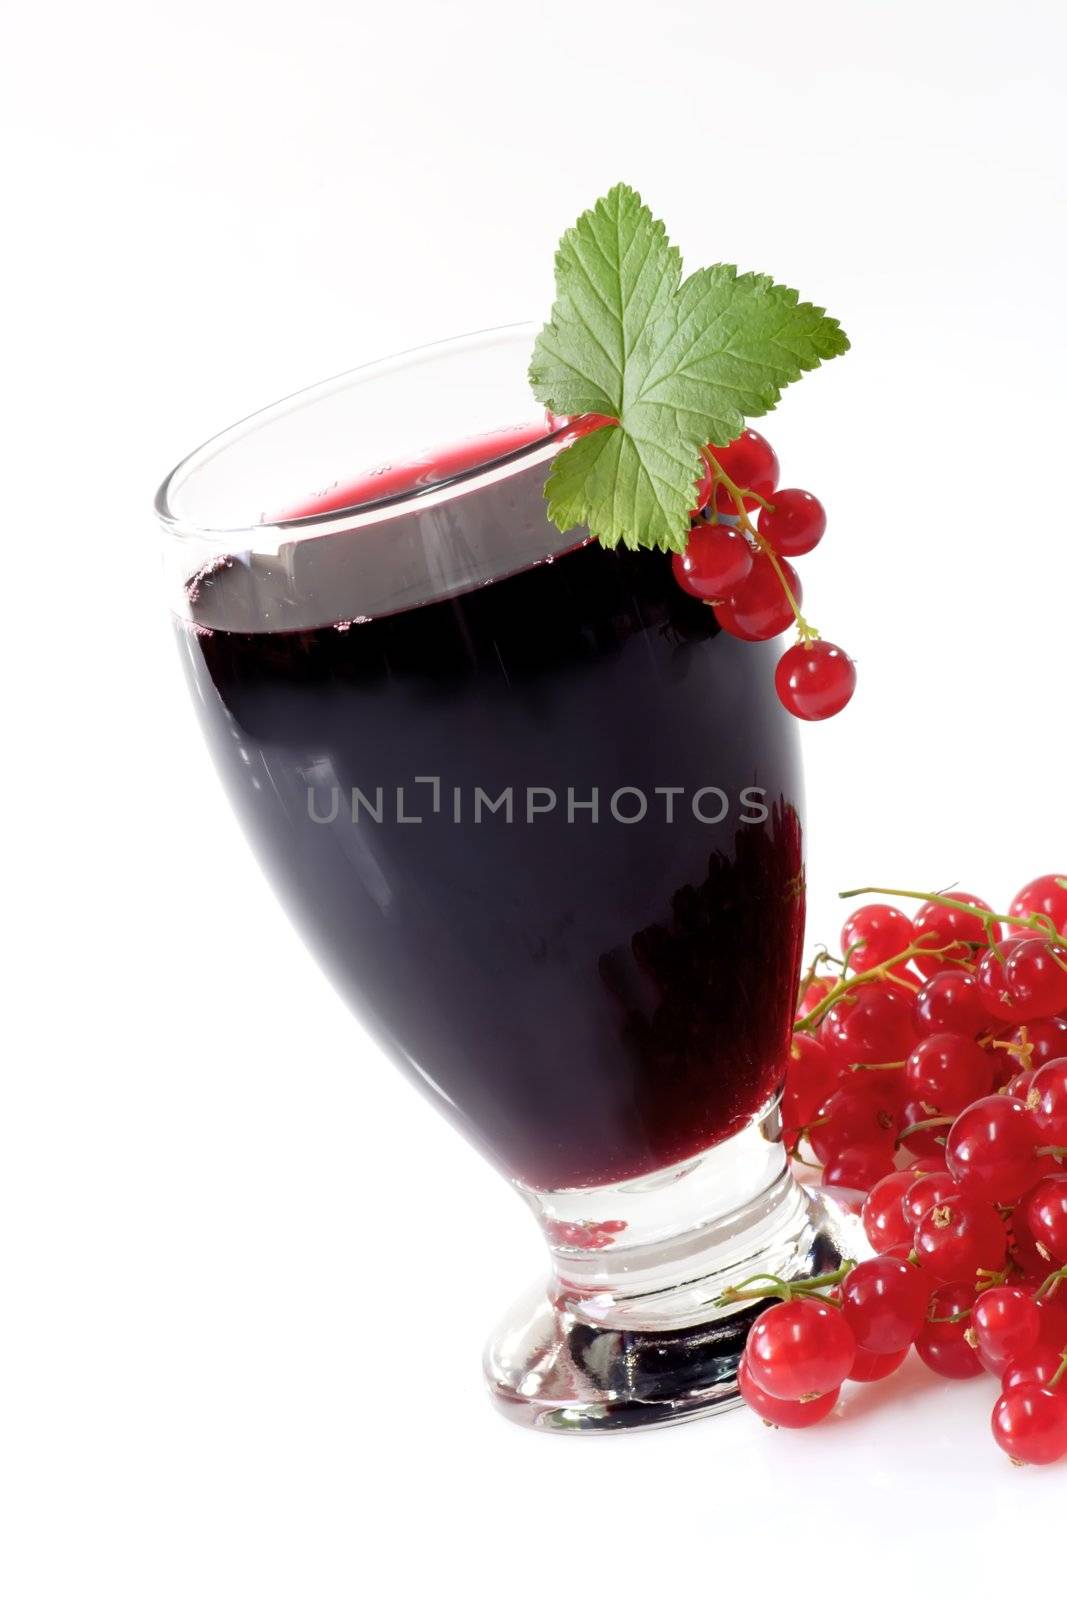 Currant Juice by Teamarbeit